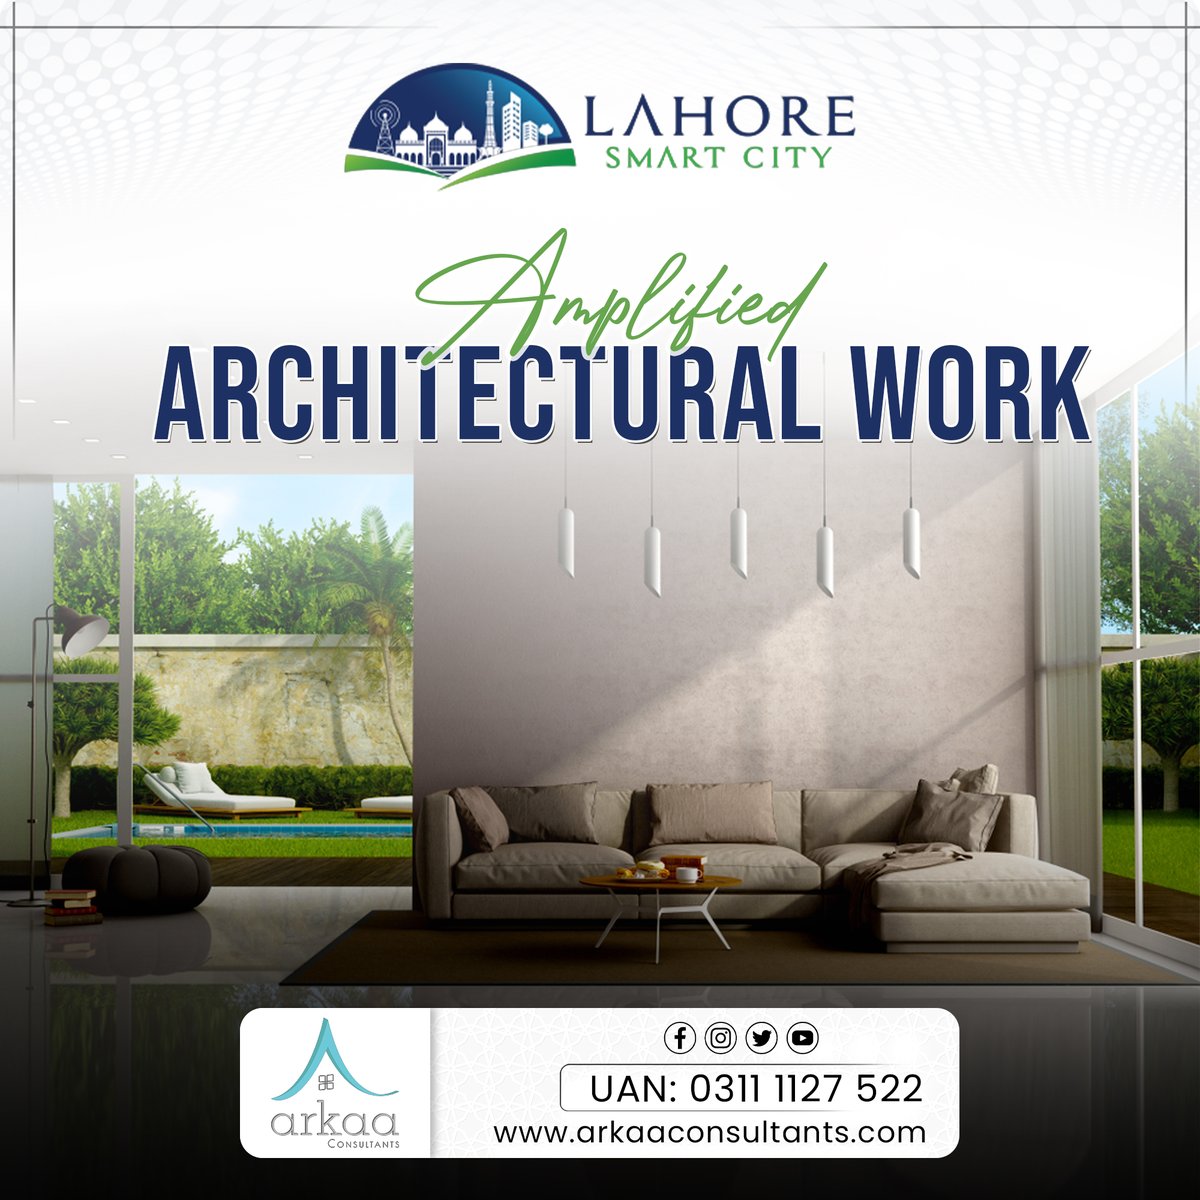 Pushing boundaries with innovative architectural concepts at Lahore Smart City.

#Arkaa #lahoresmartcity #arkaaconsultants #smartinterchange #SmartCities #lscresidential #StayTuned #nextbigthing #lsc #lahore #AmplifiedExperience #amazingarchitechture #architechturemarvels